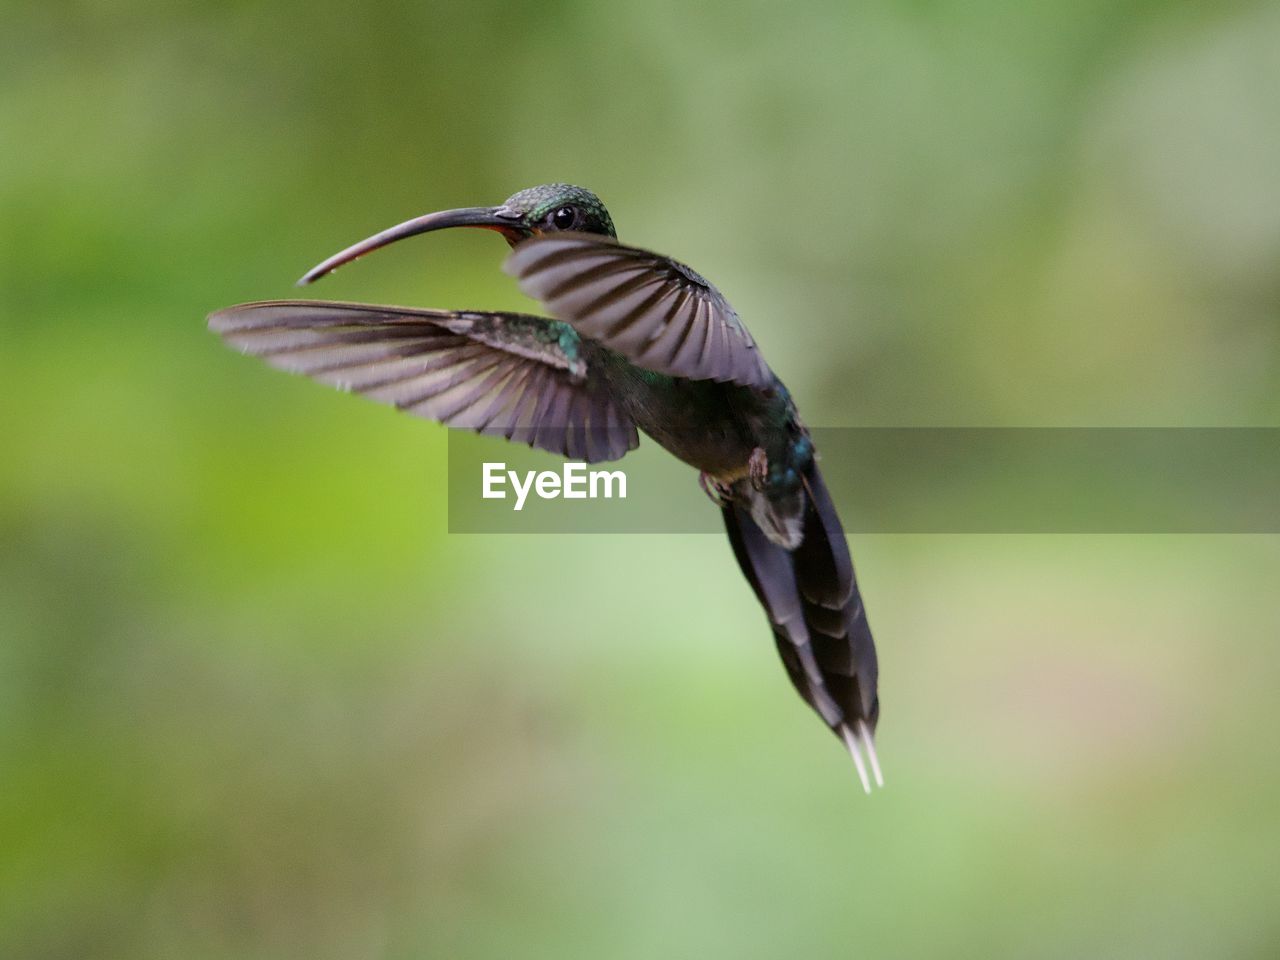 bird, animal themes, animal, flying, animal wildlife, wildlife, one animal, spread wings, mid-air, beak, hummingbird, motion, animal body part, nature, no people, close-up, wing, focus on foreground, animal wing, outdoors, full length, hovering, beauty in nature, day